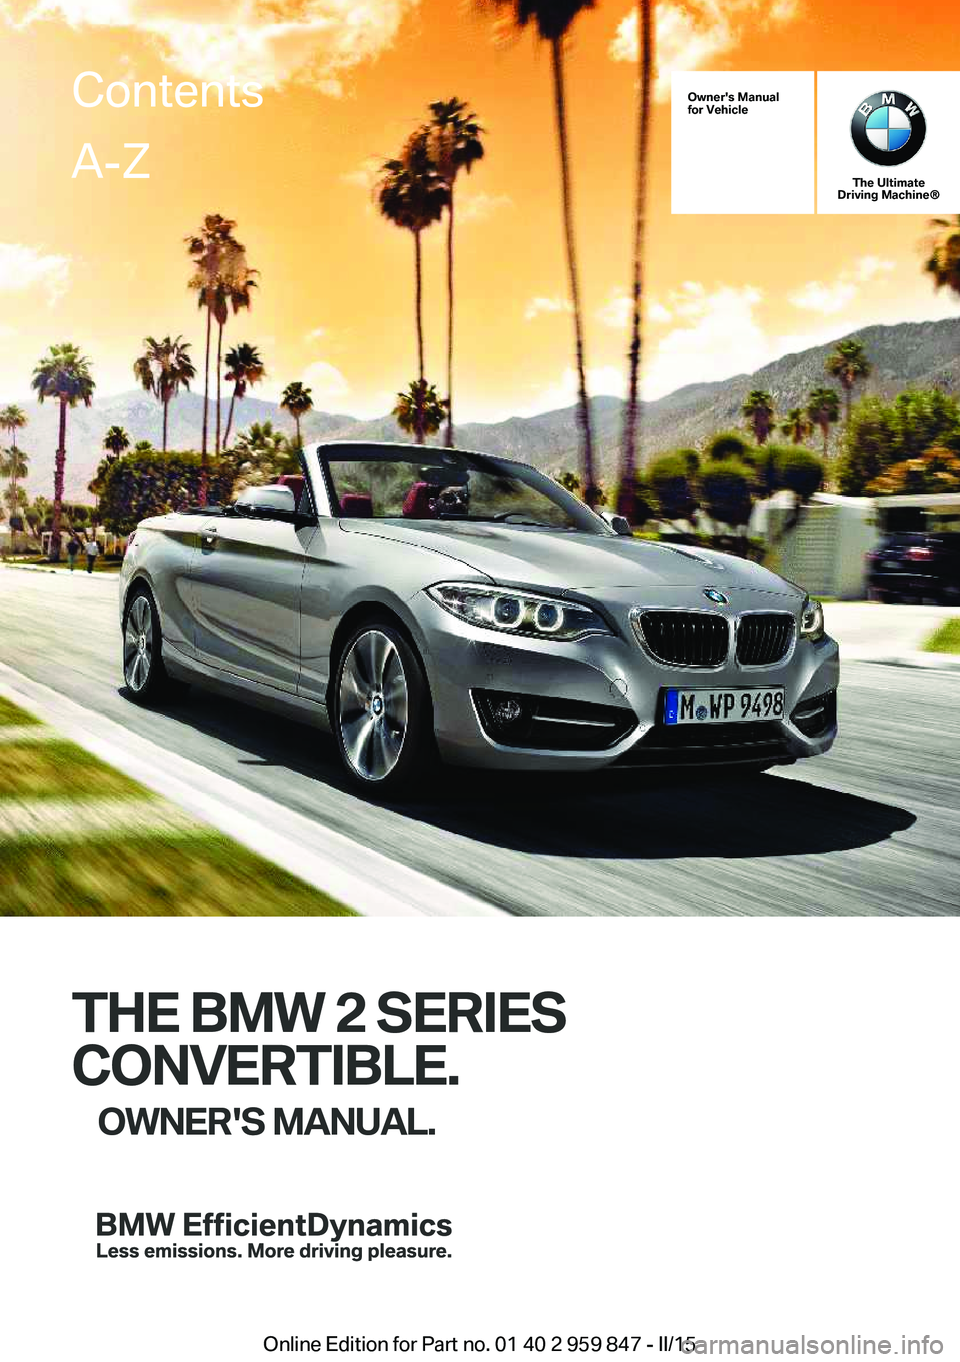 BMW 228I 2016  Owners Manual Owner's Manual
for Vehicle
The Ultimate
Driving Machine®
THE BMW 2 SERIES
CONVERTIBLE. OWNER'S MANUAL.
ContentsA-Z
Online Edition for Part no. 01 40 2 959 847 - II/15   